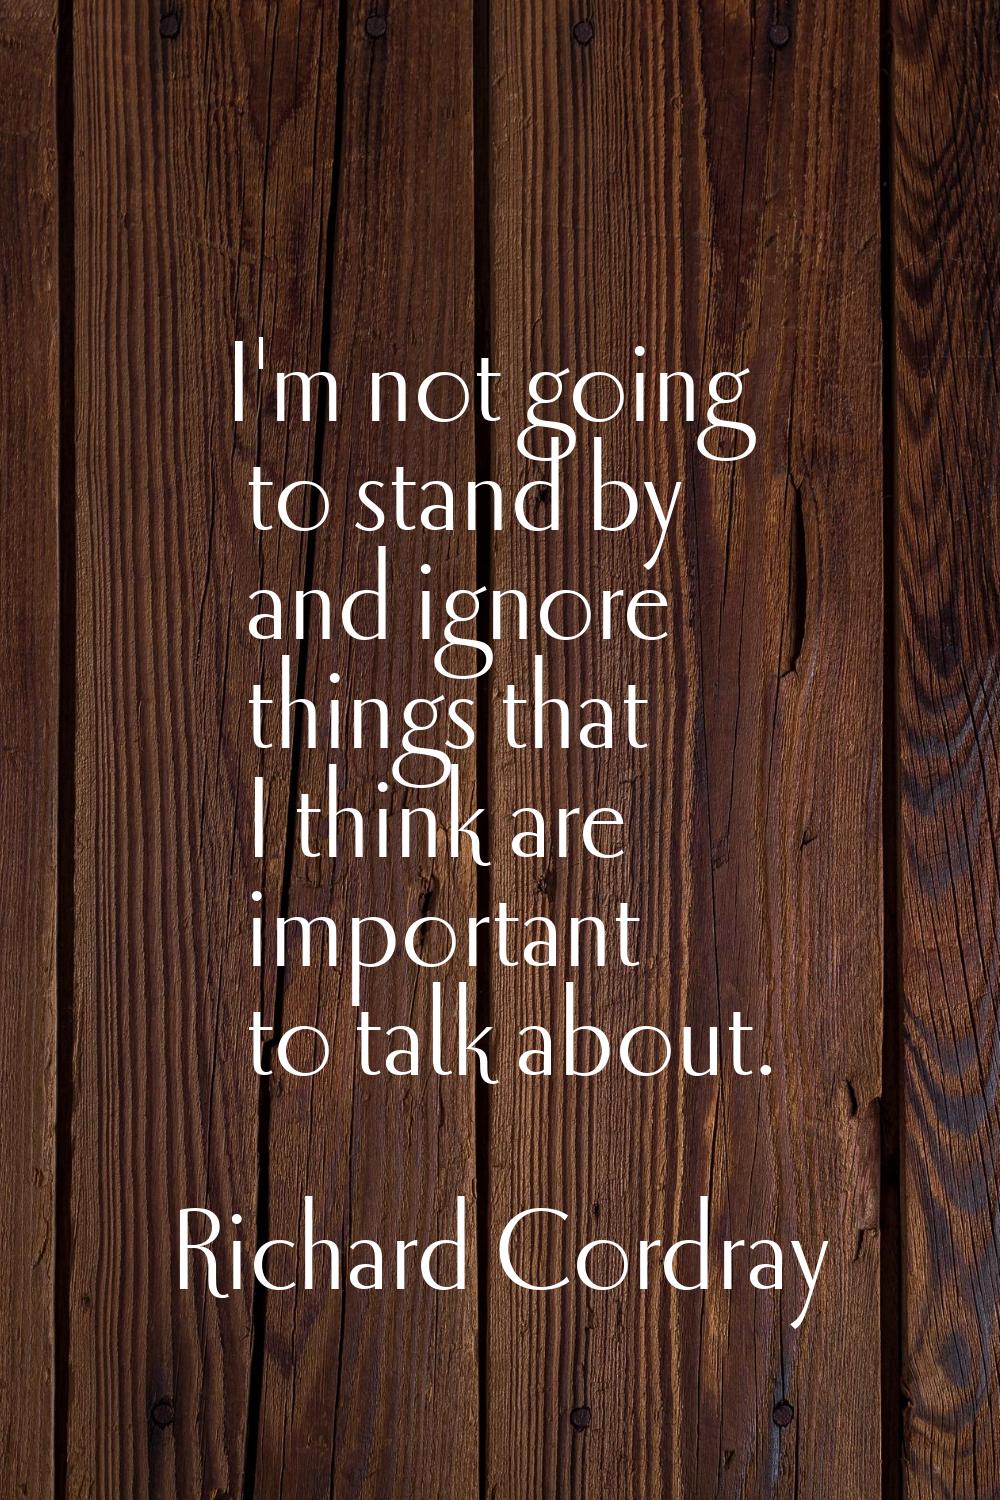 I'm not going to stand by and ignore things that I think are important to talk about.